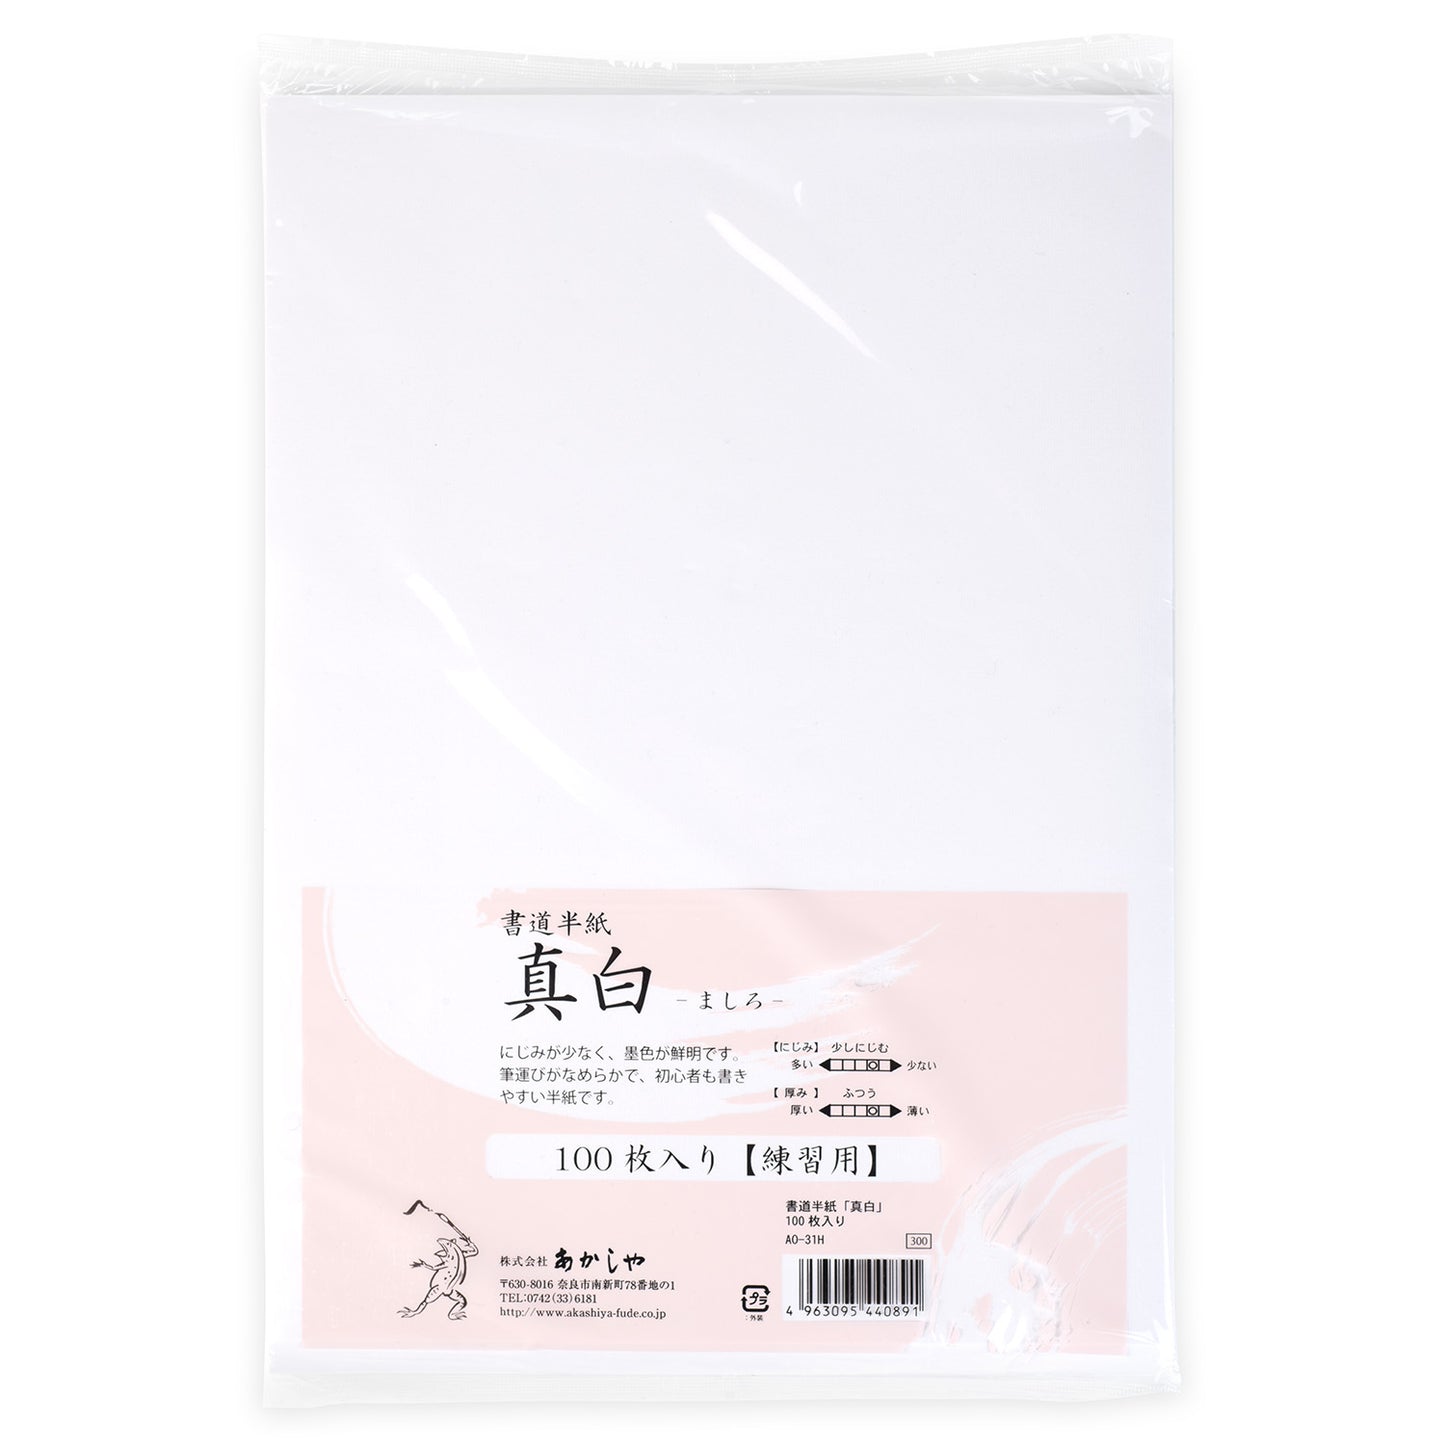 New White Japanese Calligraphy Rice Paper